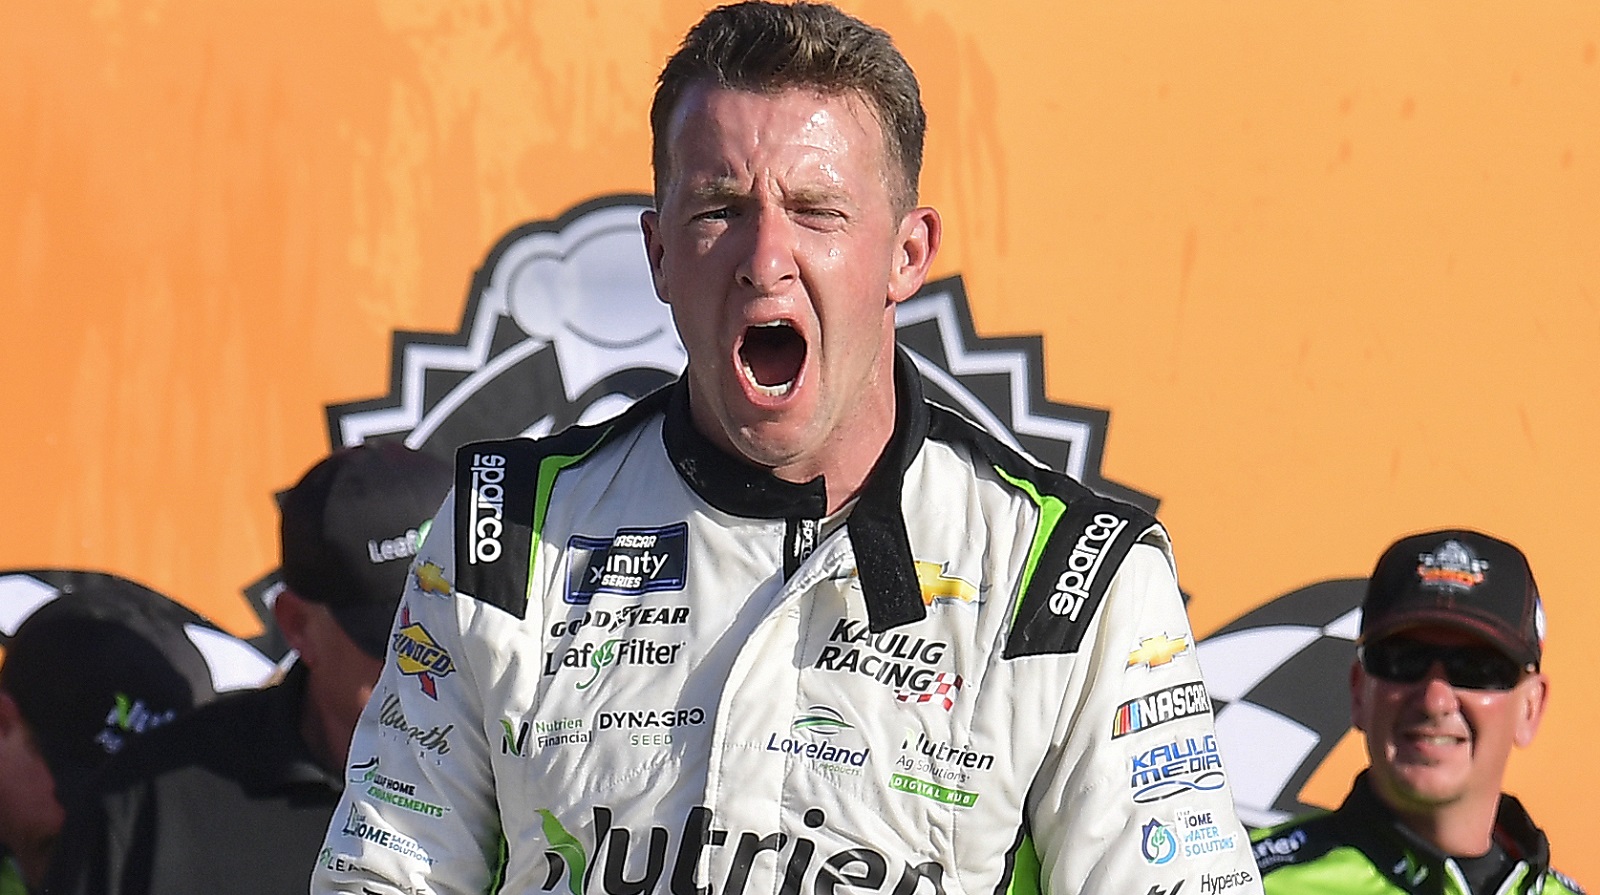 AJ Allmendinger celebrates in Victory Lane after winning the NASCAR Xfinity Series Pit Boss 250 at Circuit of The Americas on March 26, 2022.